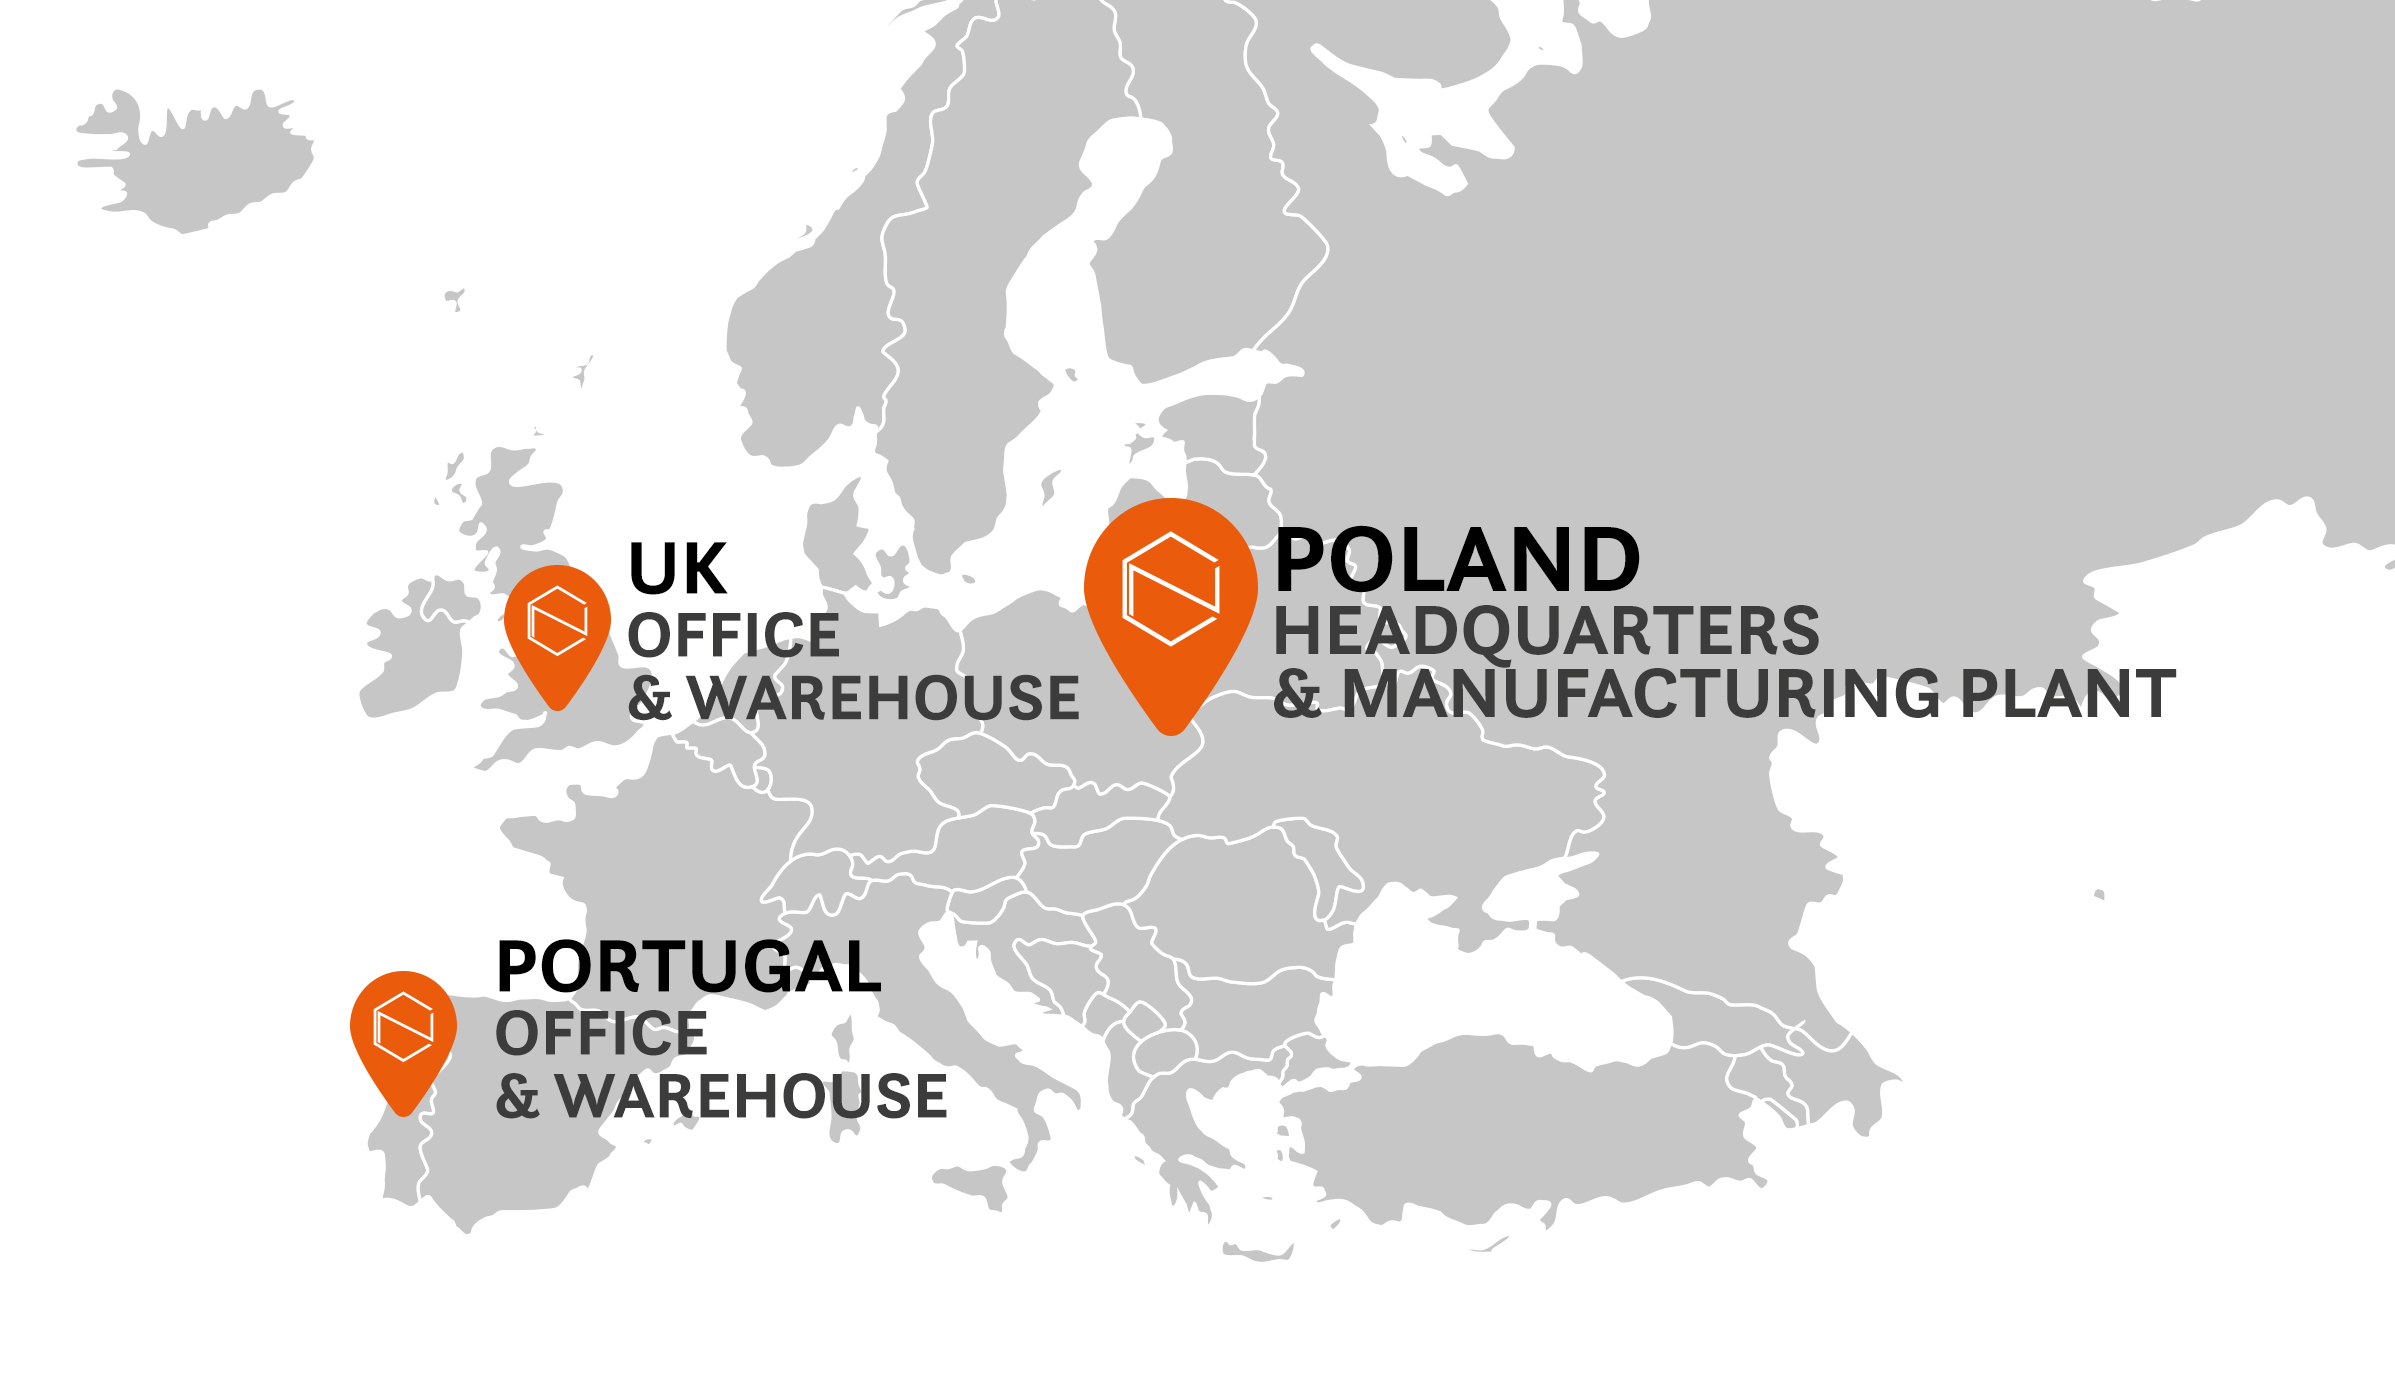 a part of World map - Europe and Asia with 3 pointers marked - Poland (headquarter & manufacturing plant), UK (office & warehouse), Portugal (office & warehouse)